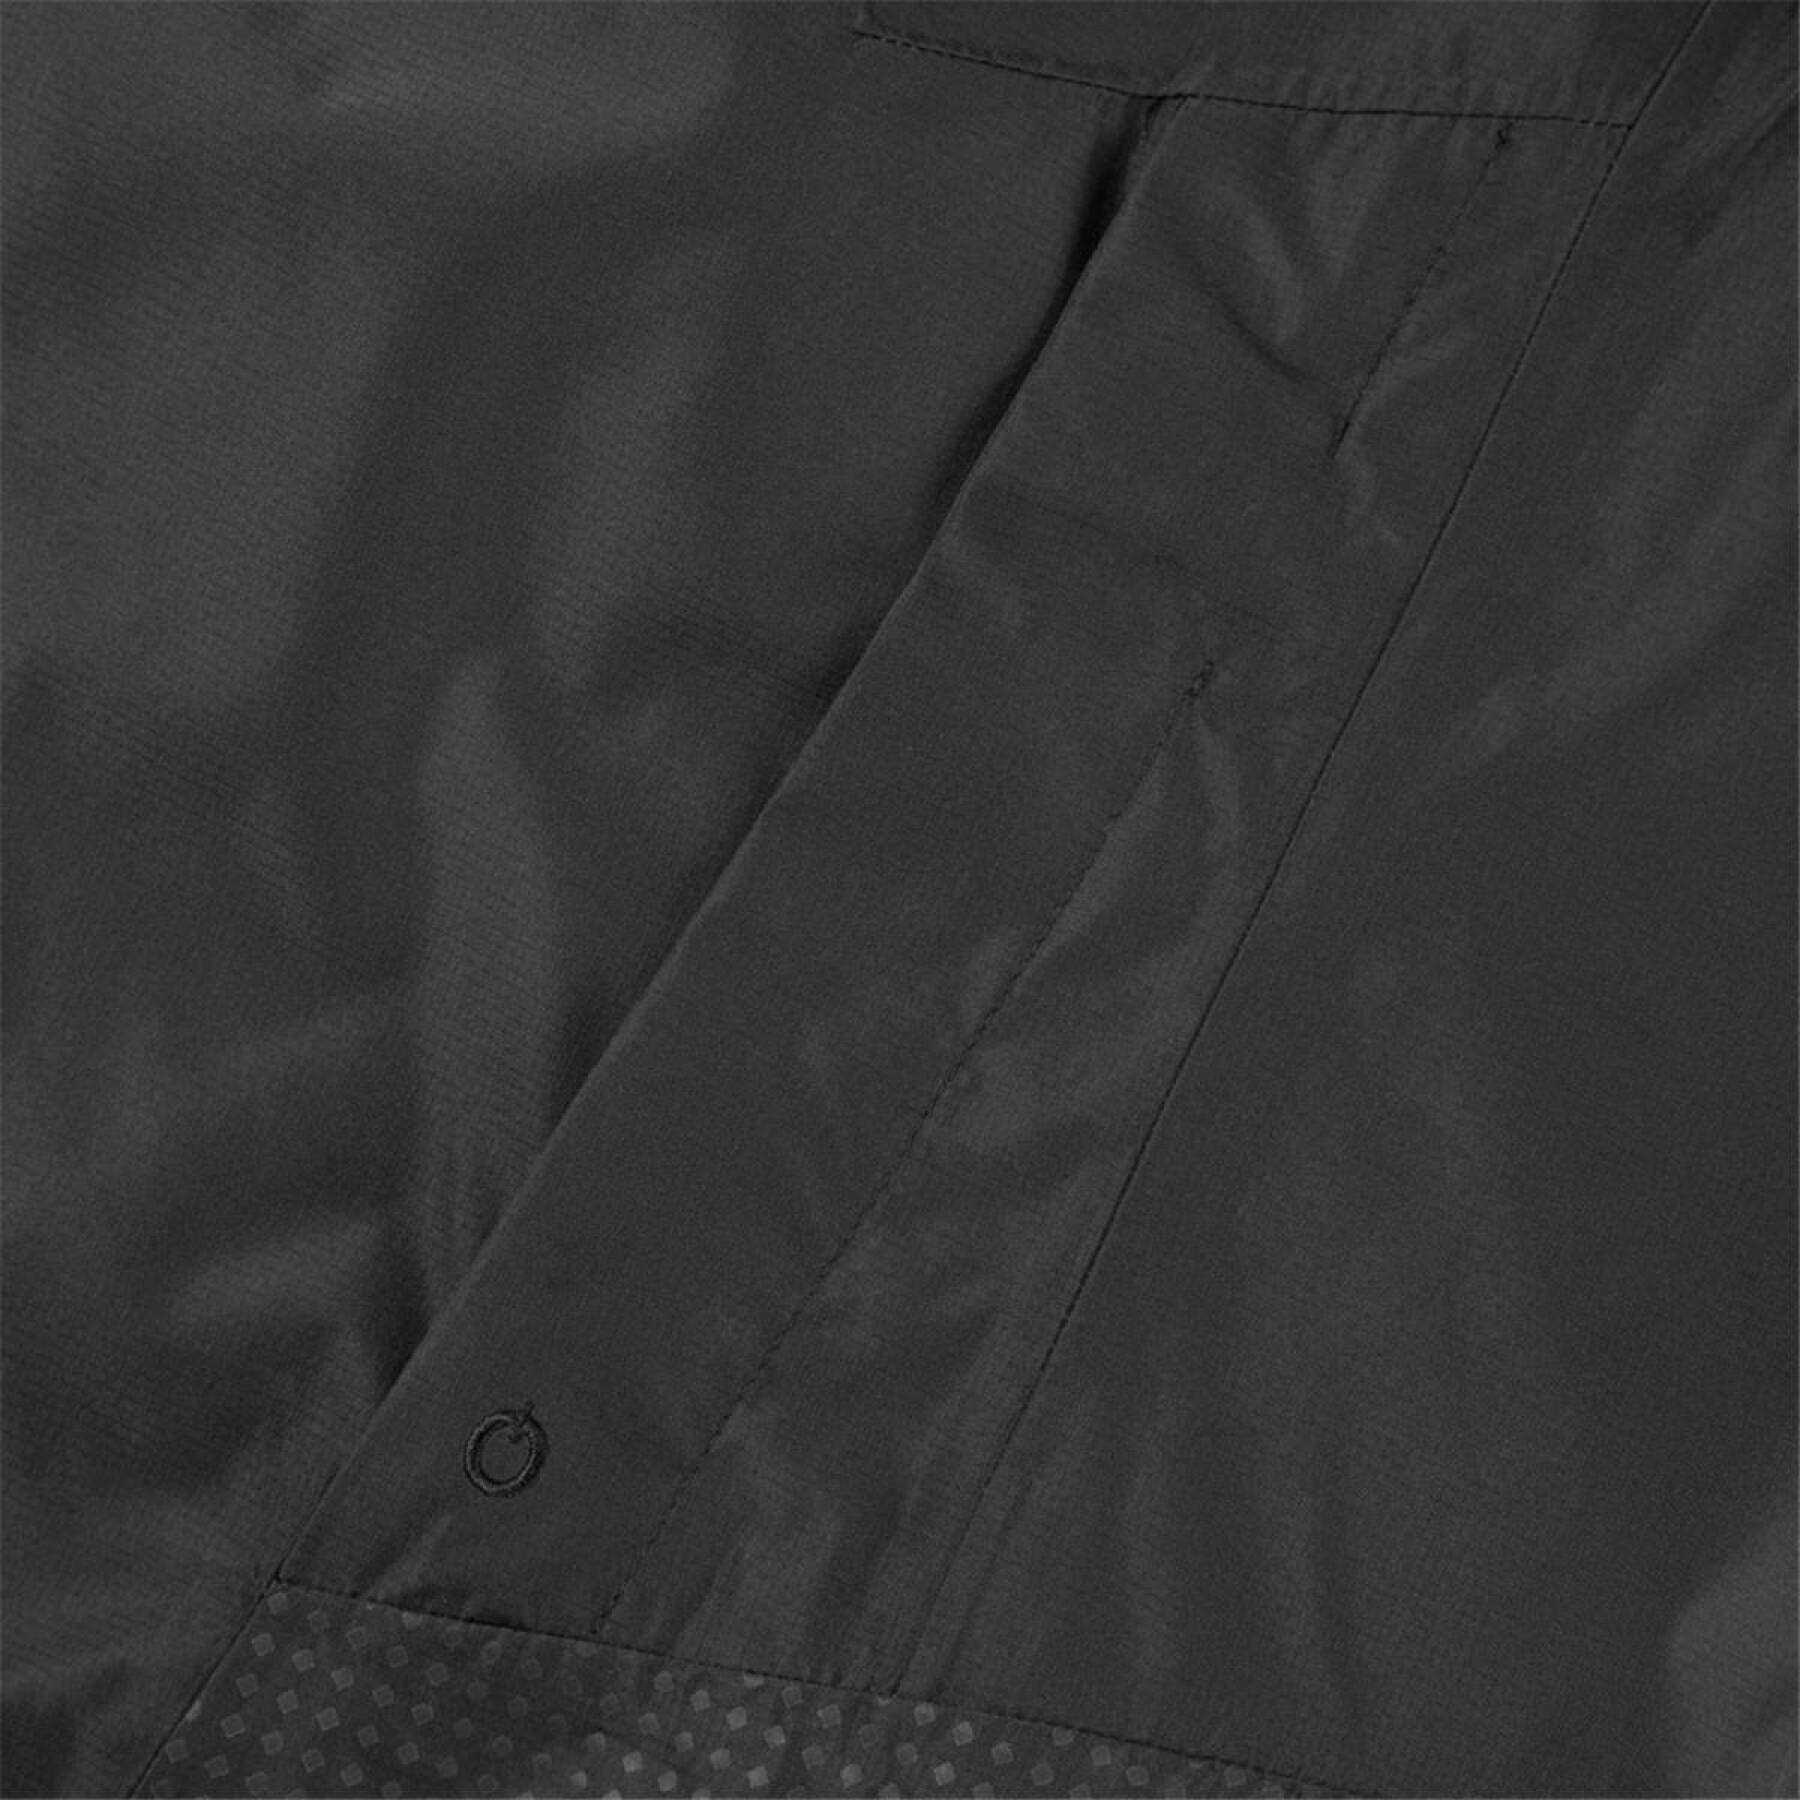 Chaqueta impermeable Altura Electron Nightvision